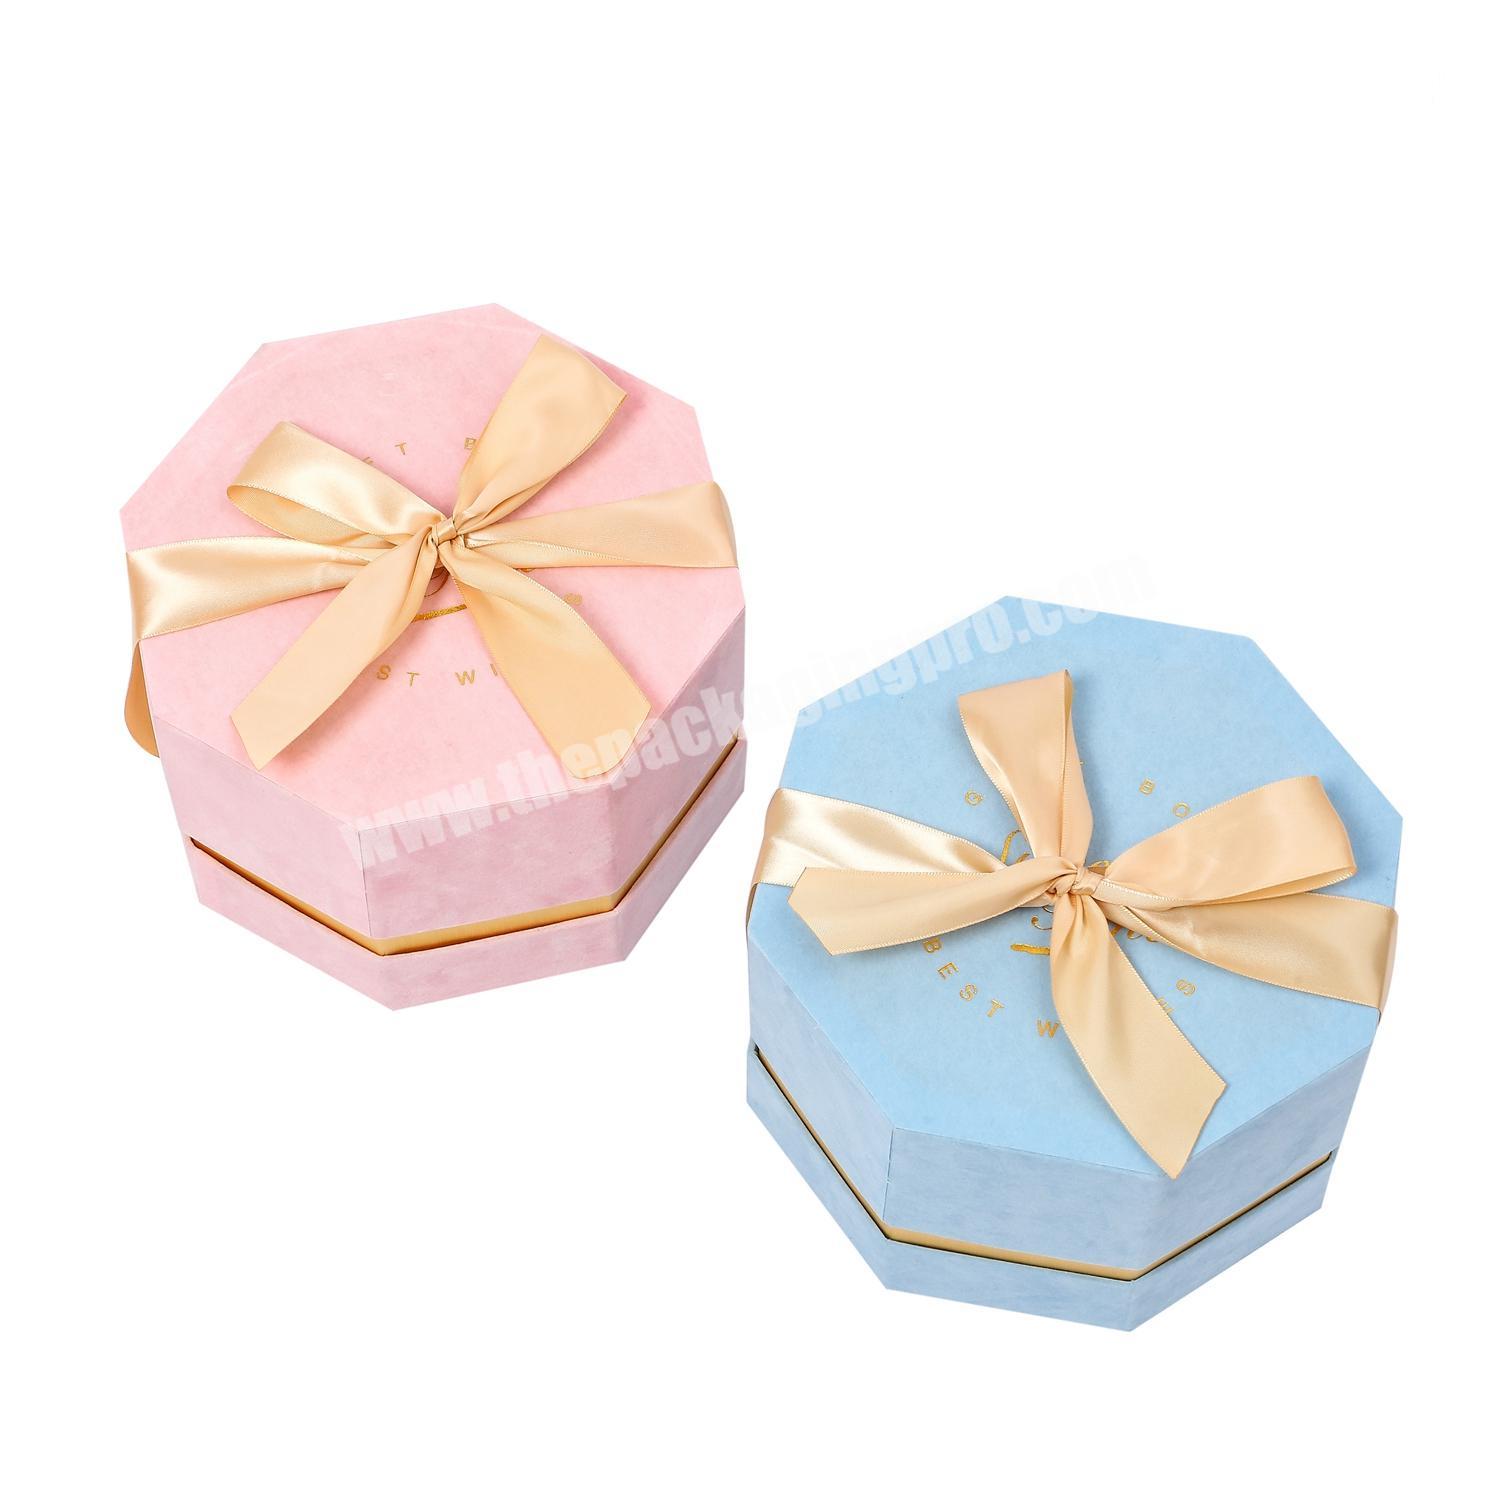 China Factory Wholesale Flannel Octagon Cardboard Gift Box Ring Watch Gift Storage Box Jewelry Packaging Boxes with Lid and Base